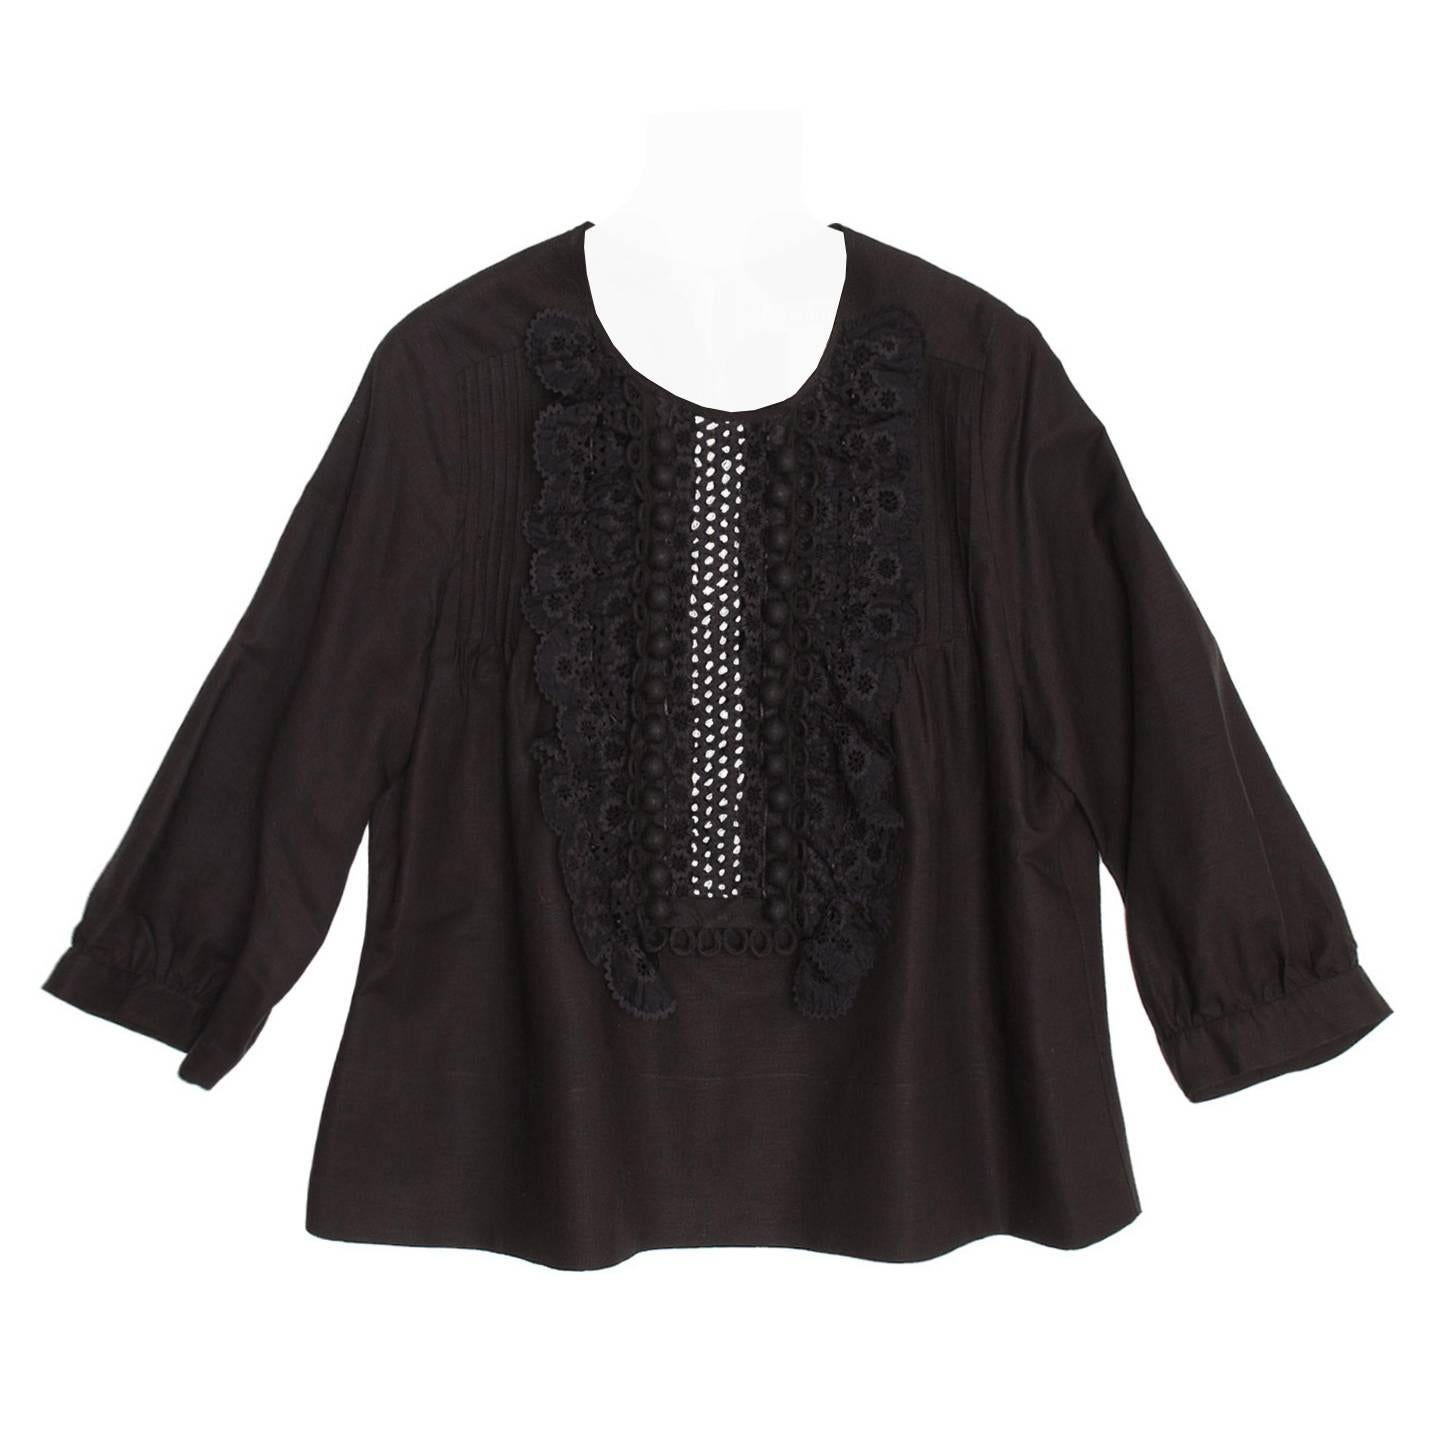 Chloe' Black Linen Top With Ruffles For Sale